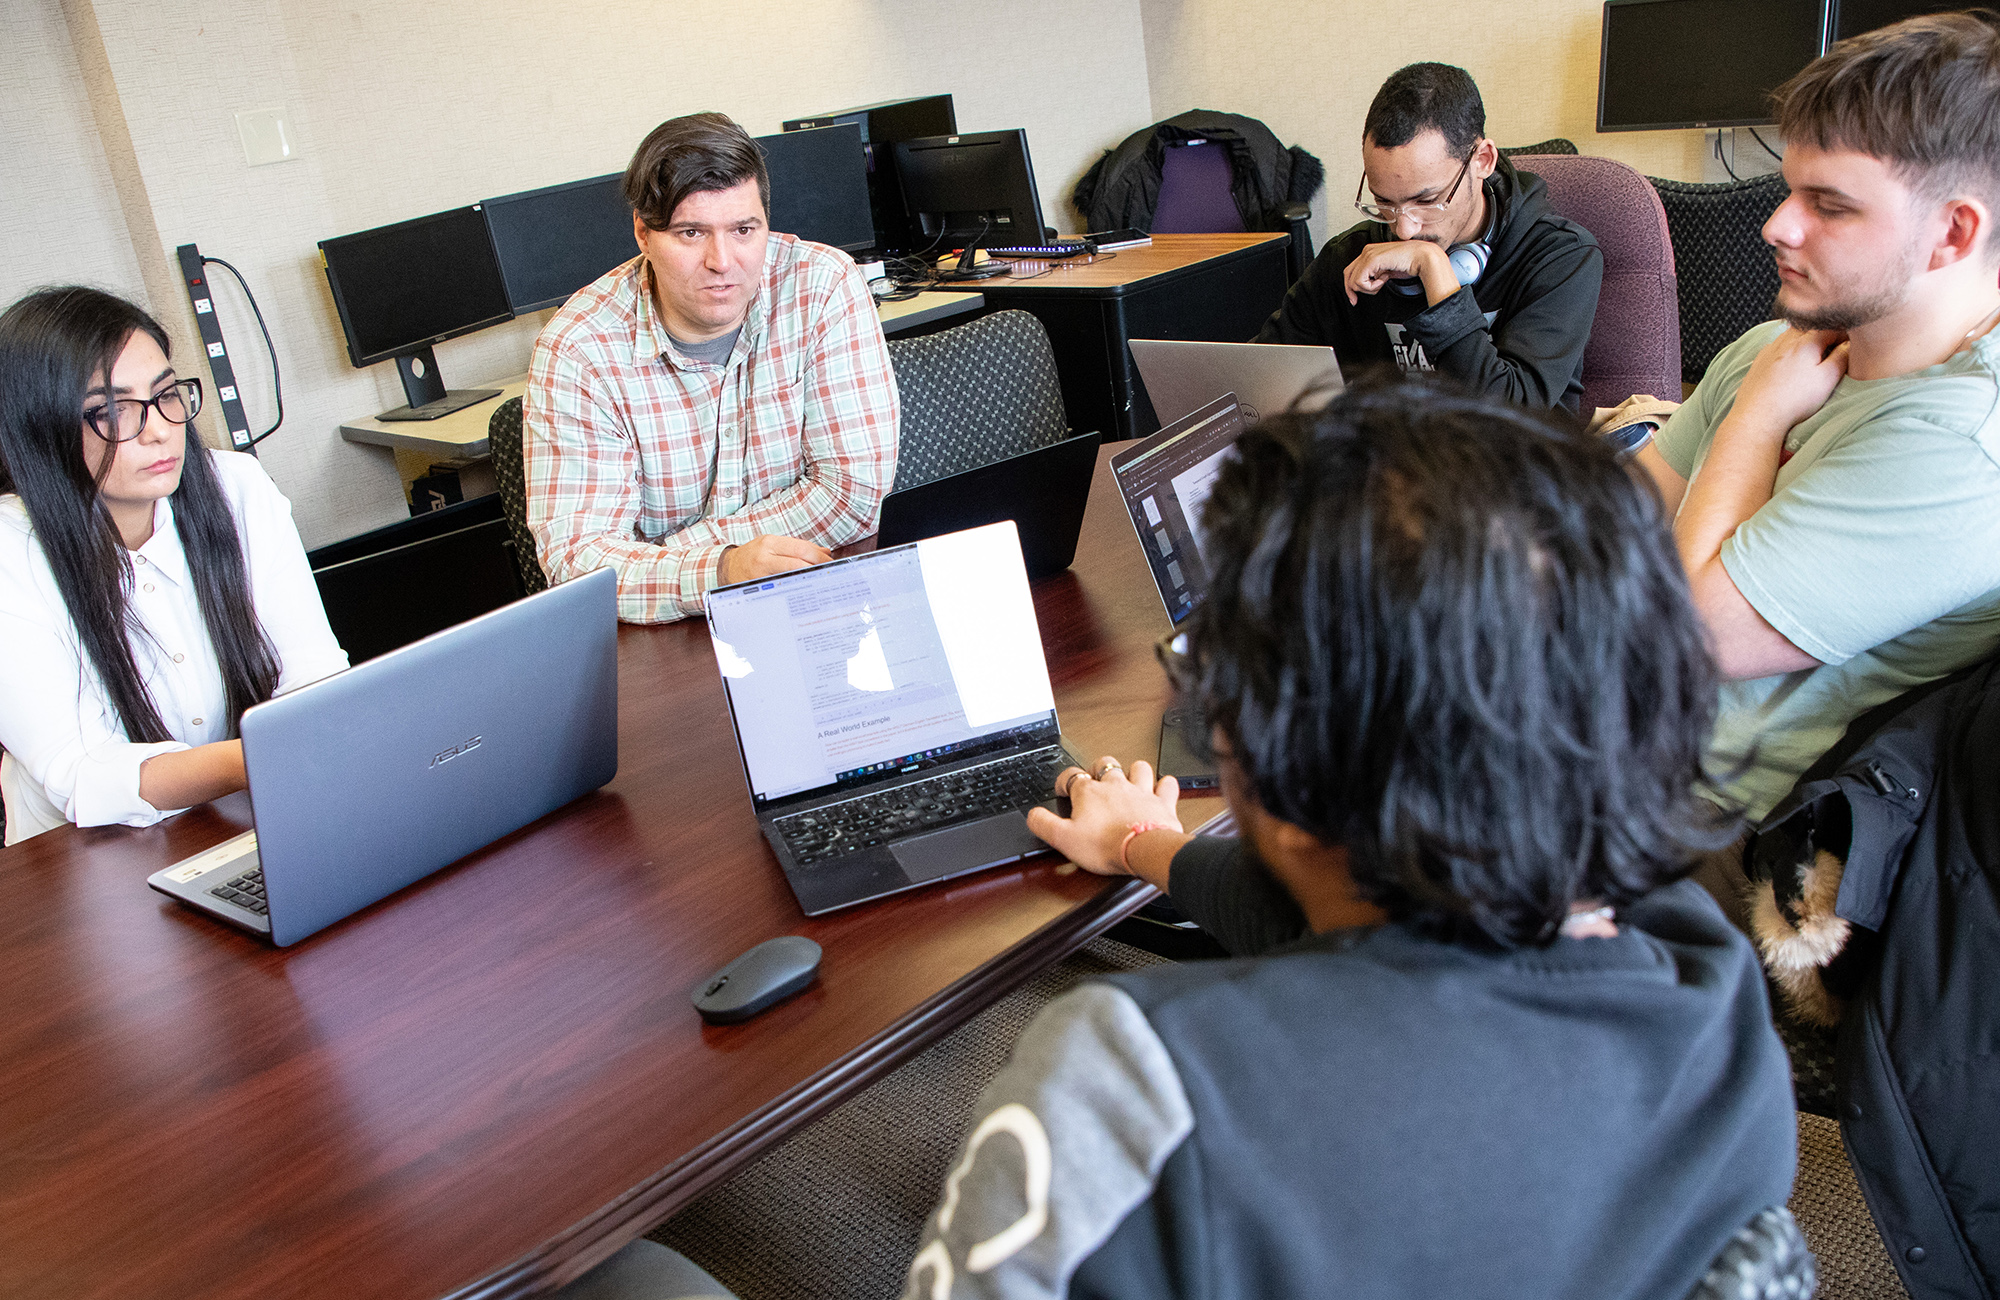 UAlbany computer scientist Petko Bogdanov meets with students at a desk in his computer lab, with students looking at their laptops.